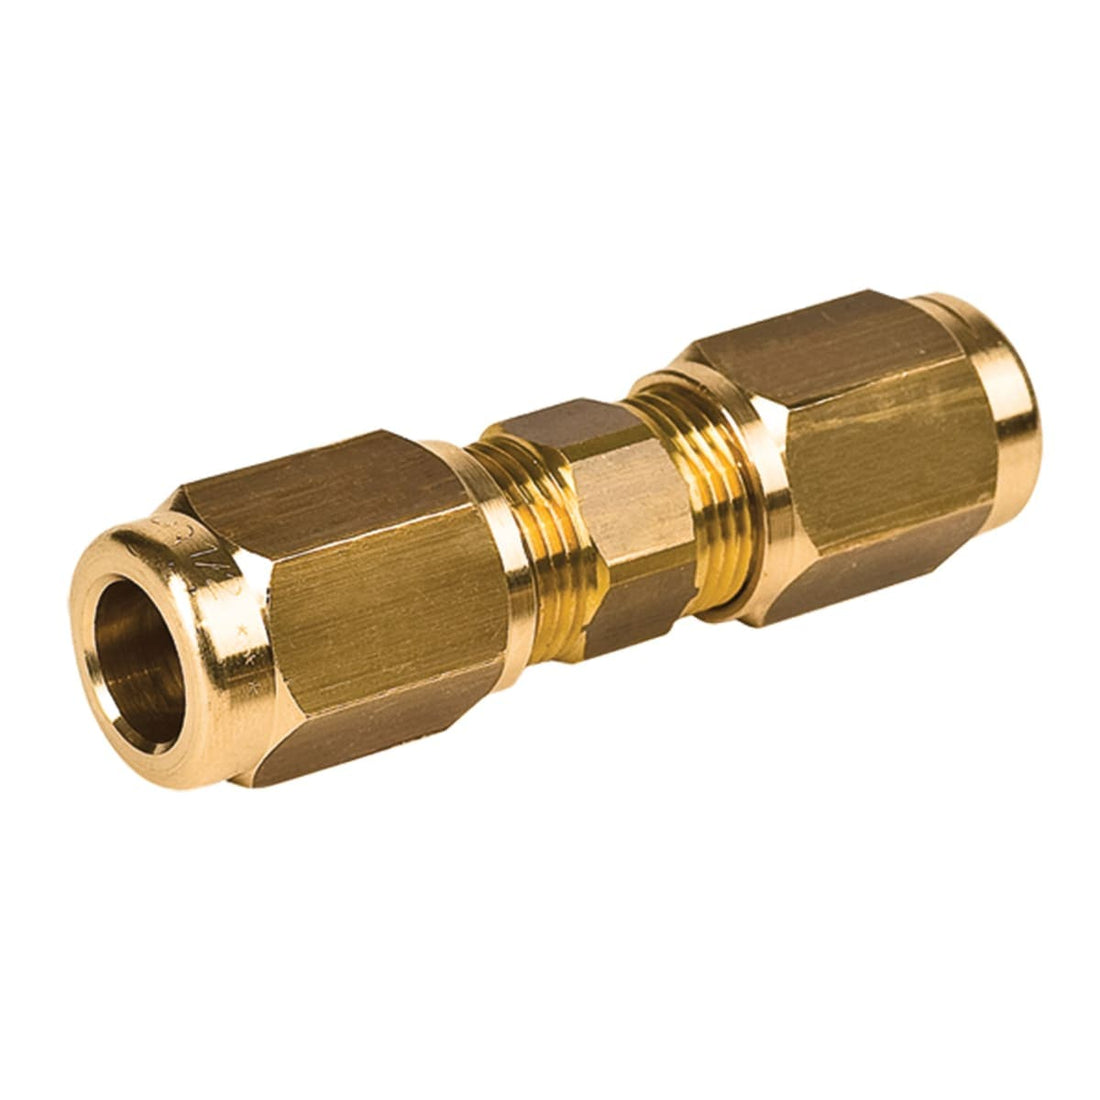 SELF-CLAMPING LINEAR FITTING DIA 1/2 INCH FOR AIR CONDITIONING COPPER PIPE - best price from Maltashopper.com BR430005974